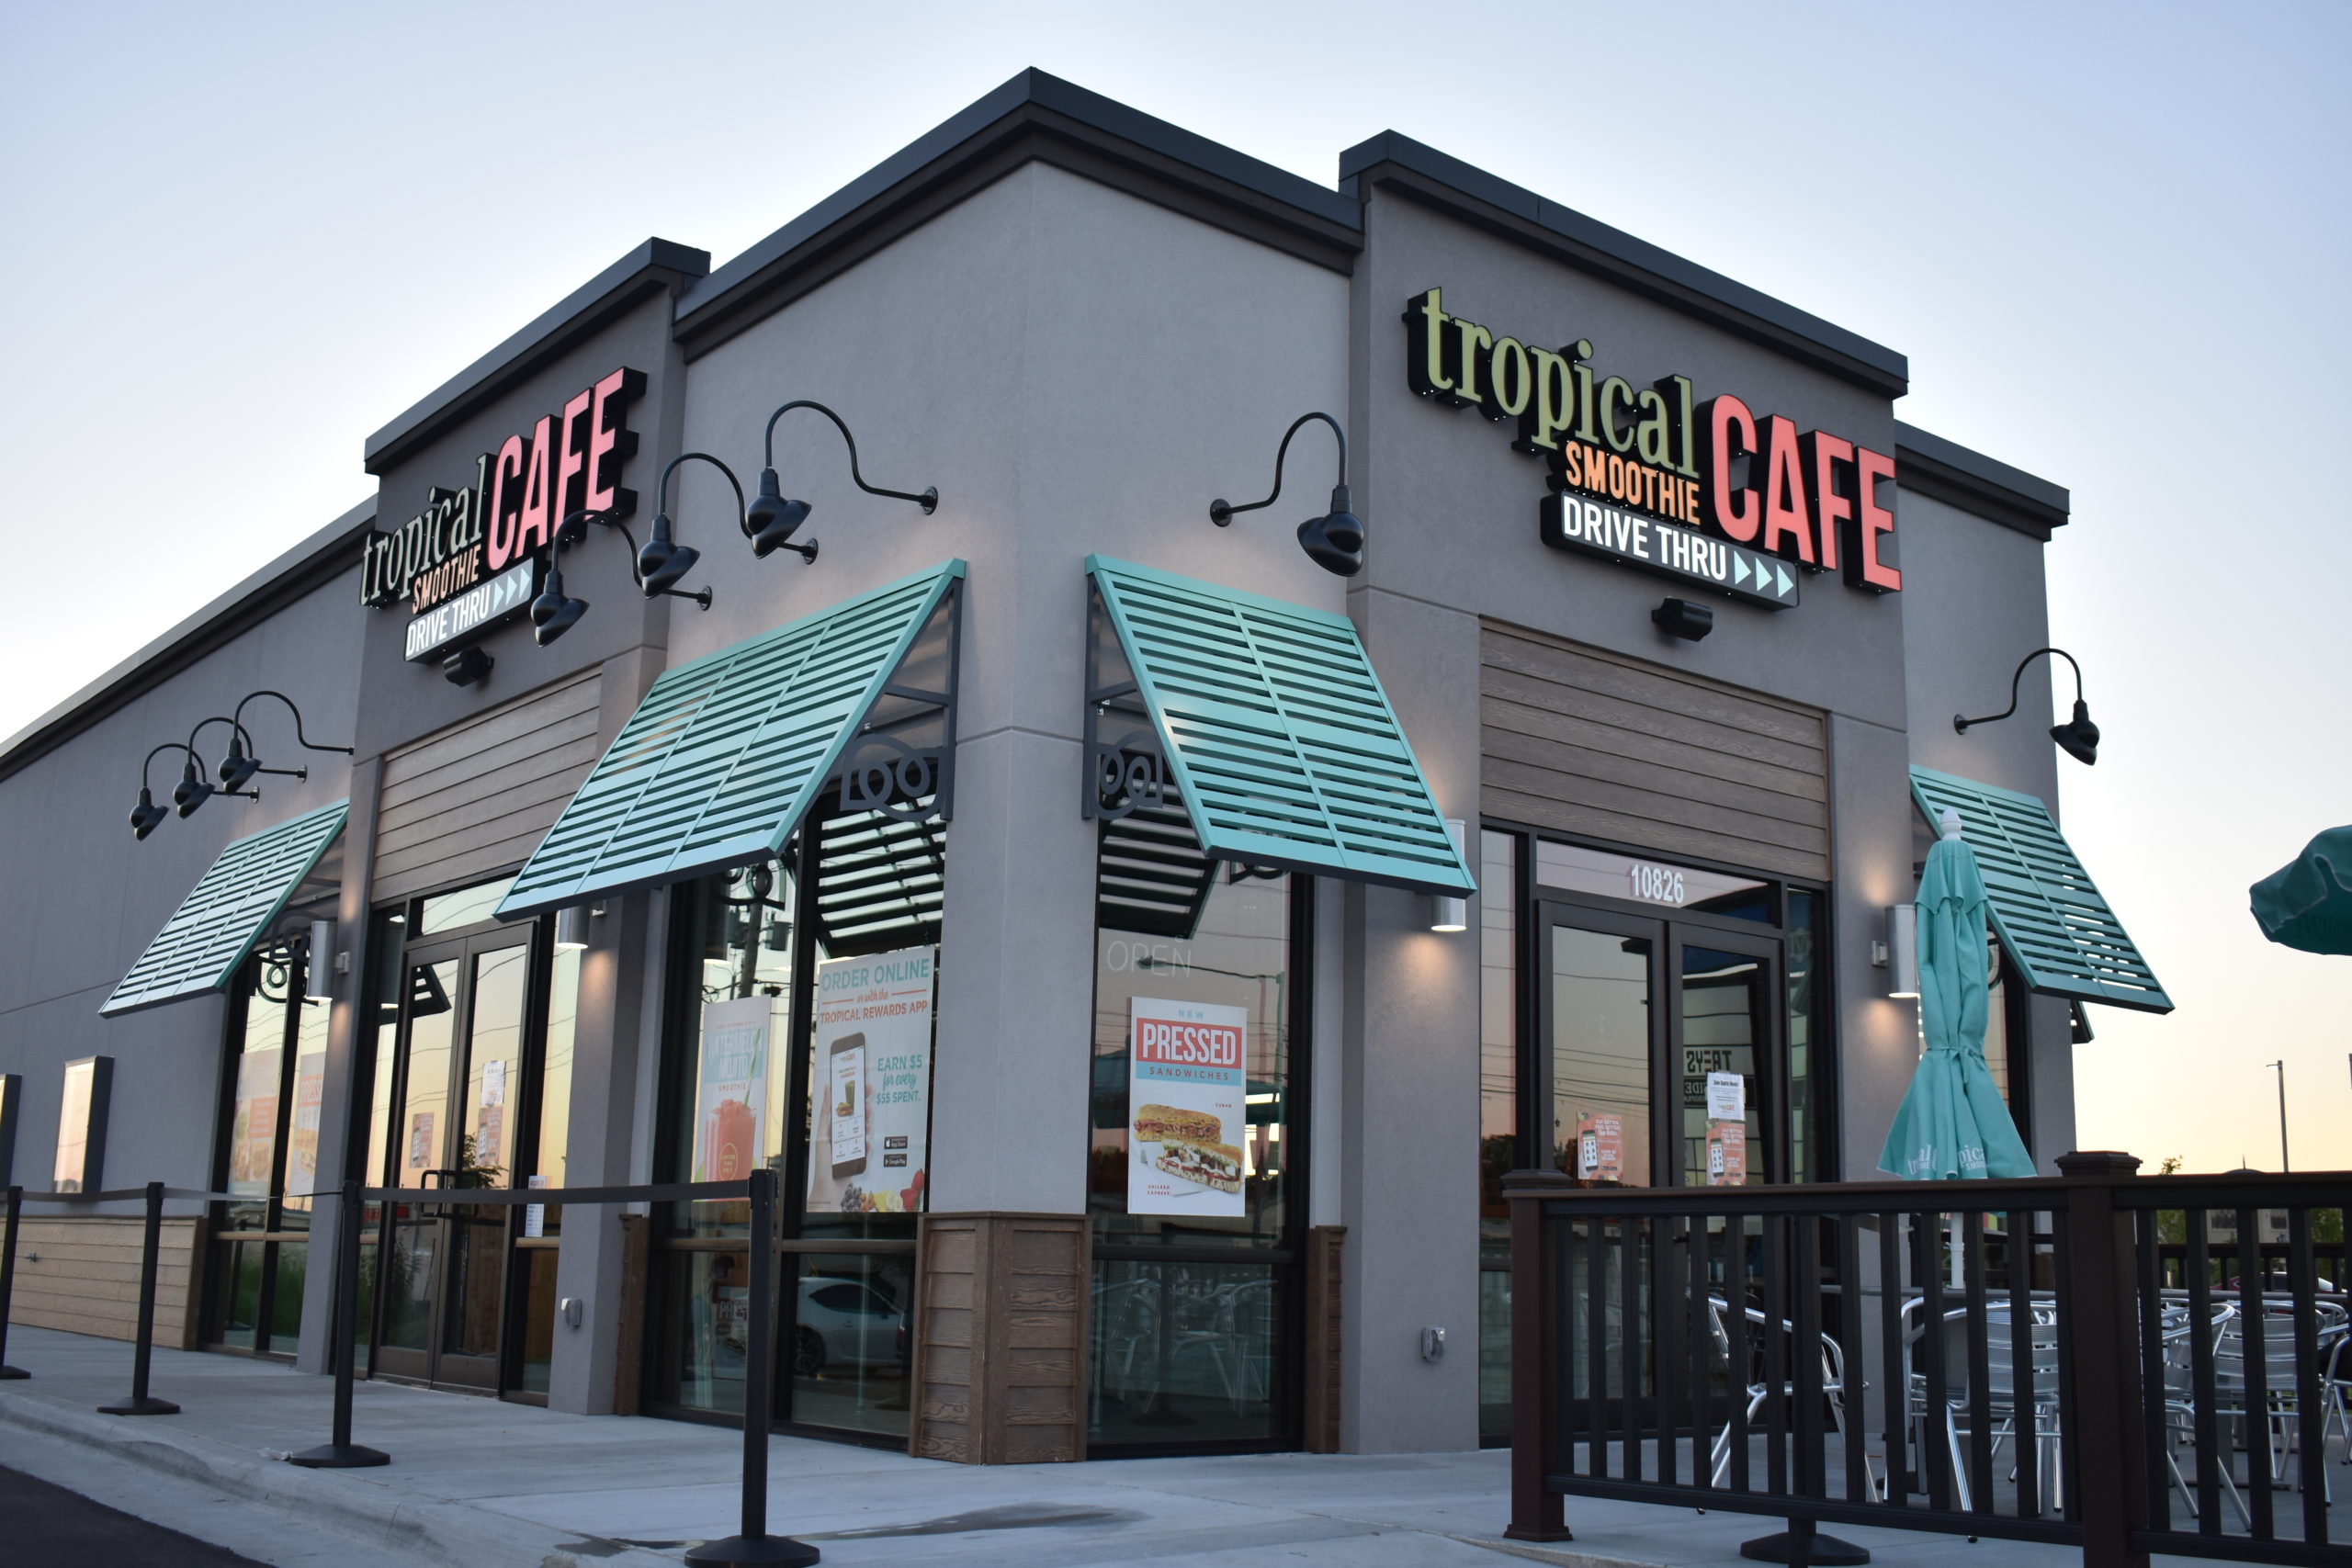 Tropical smoothie cafe location, gray building with blue awnings